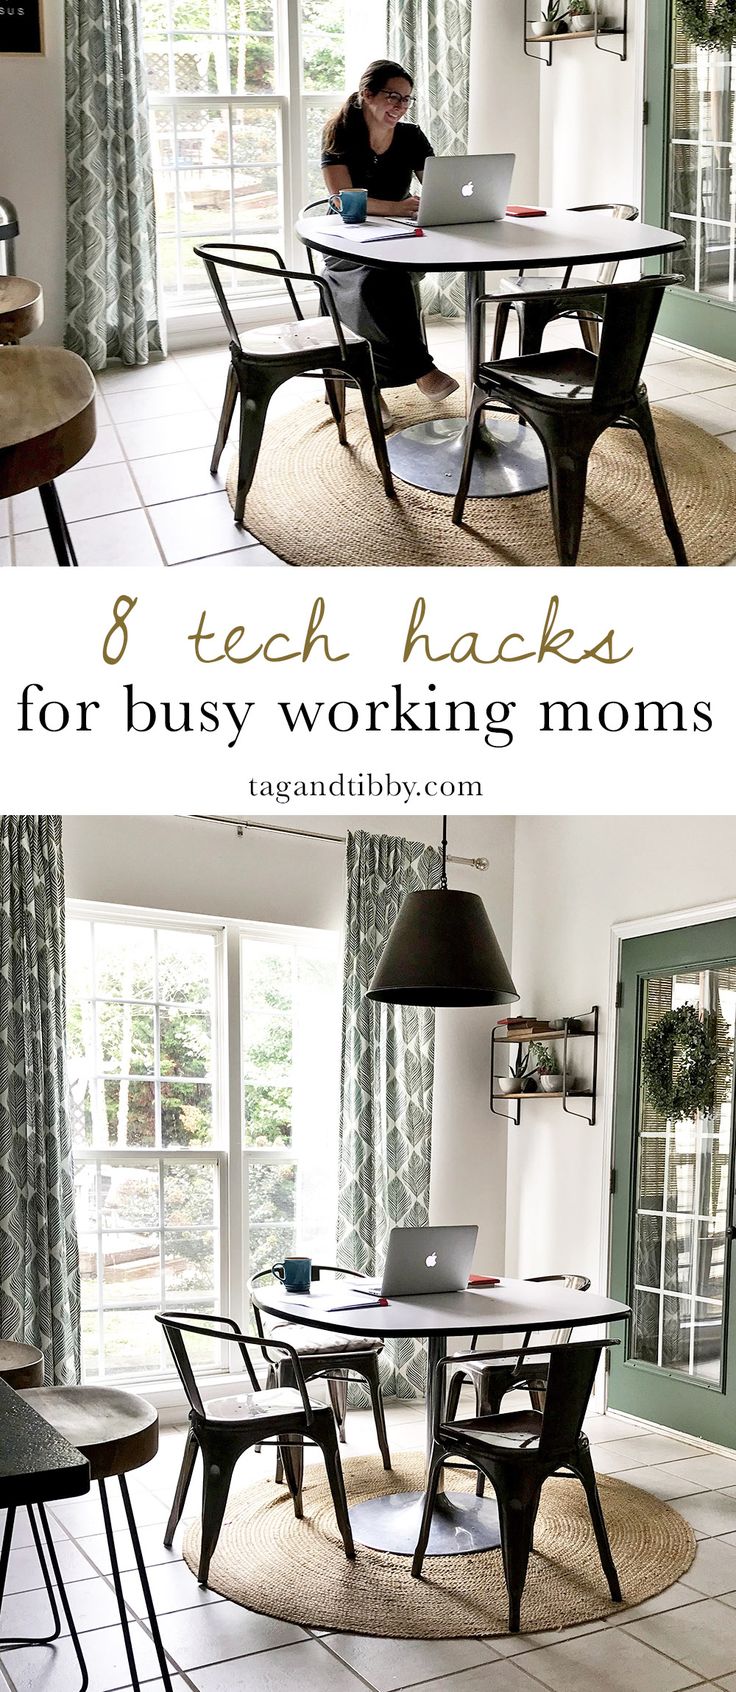 8 Ways Moms can Maximize Their Time with Technology